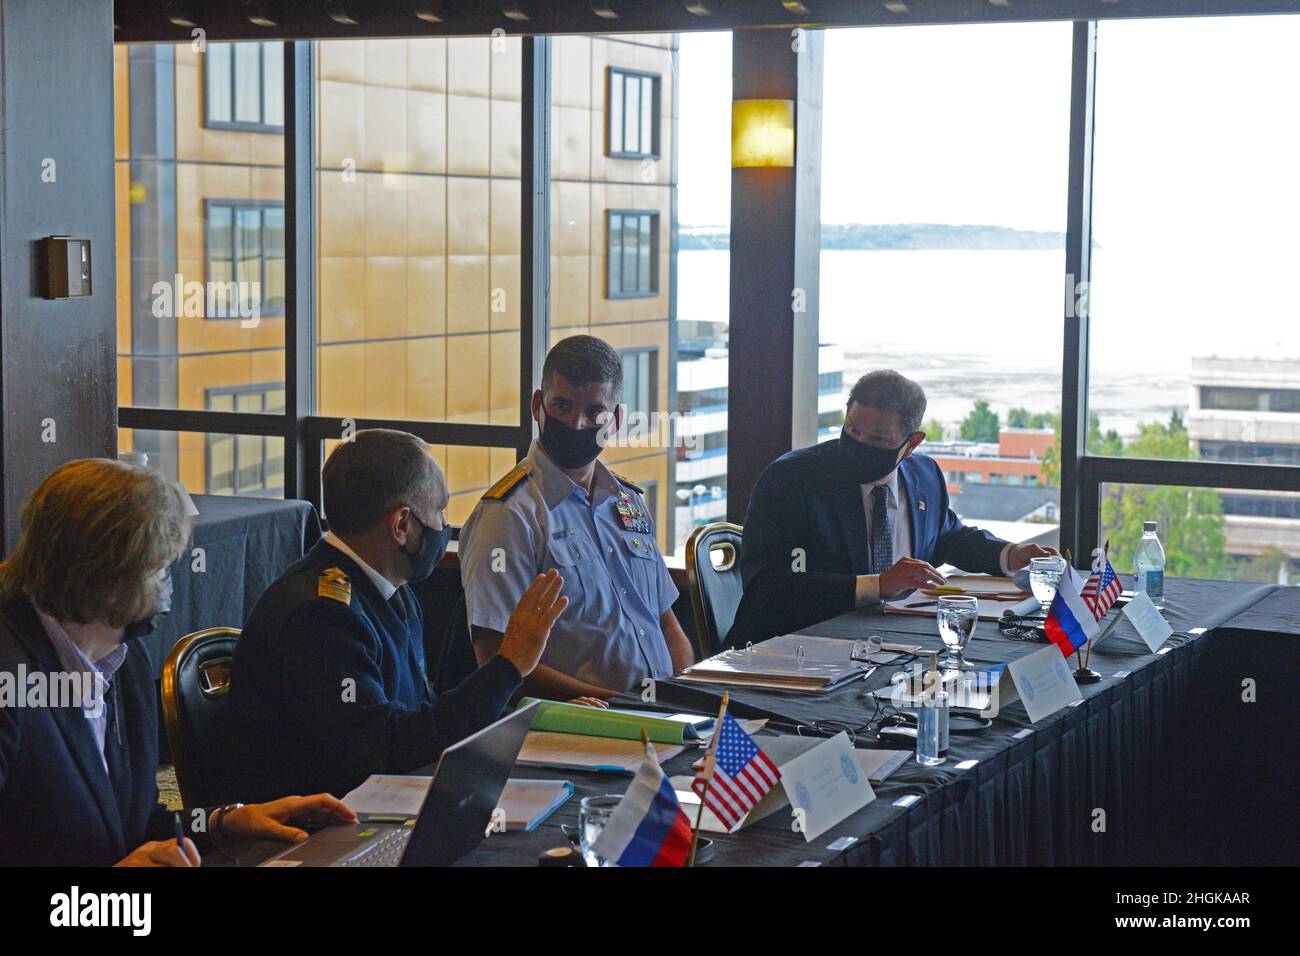 Rear Adm. Nathan A. Moore, commander, Seventeenth Coast Guard District, discusses plans with Mr. Petr Gerasun, deputy director, Russian Federation Marine Rescue Service, during the 43rd Joint Planning Group meeting at Captain Cook Hotel in Anchorage, Alaska, Sept. 1, 2021. Members of the U.S. Coast Guard and Russian Federation delegation participated in the 43rd Joint Planning Group meeting for pollution preparedness and response cooperation in the Bering Sea and Chukchi Seas. Stock Photo